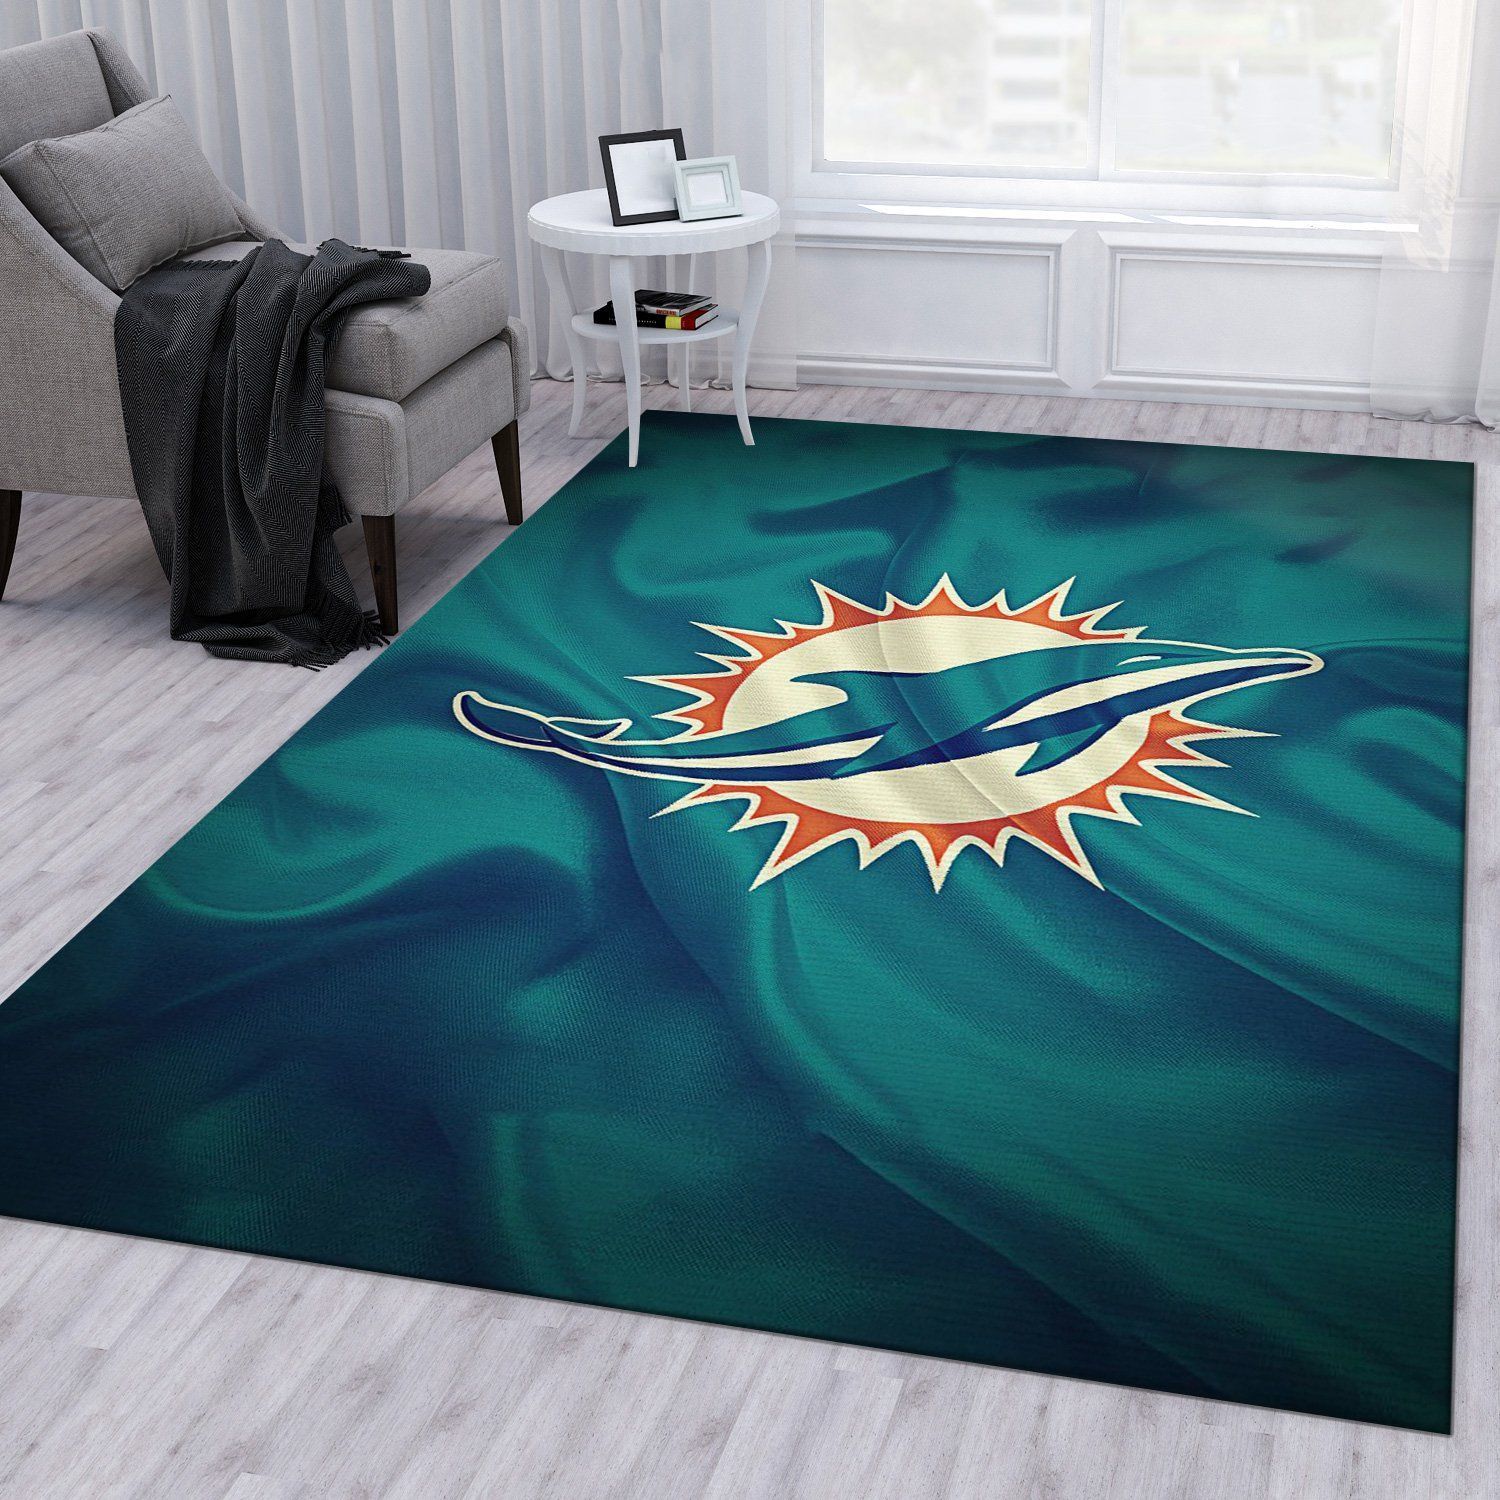 MIAMI DOLPHINS AMERICAN FO NFL RUG LIVING ROOM RUG HOME US DECOR 180222